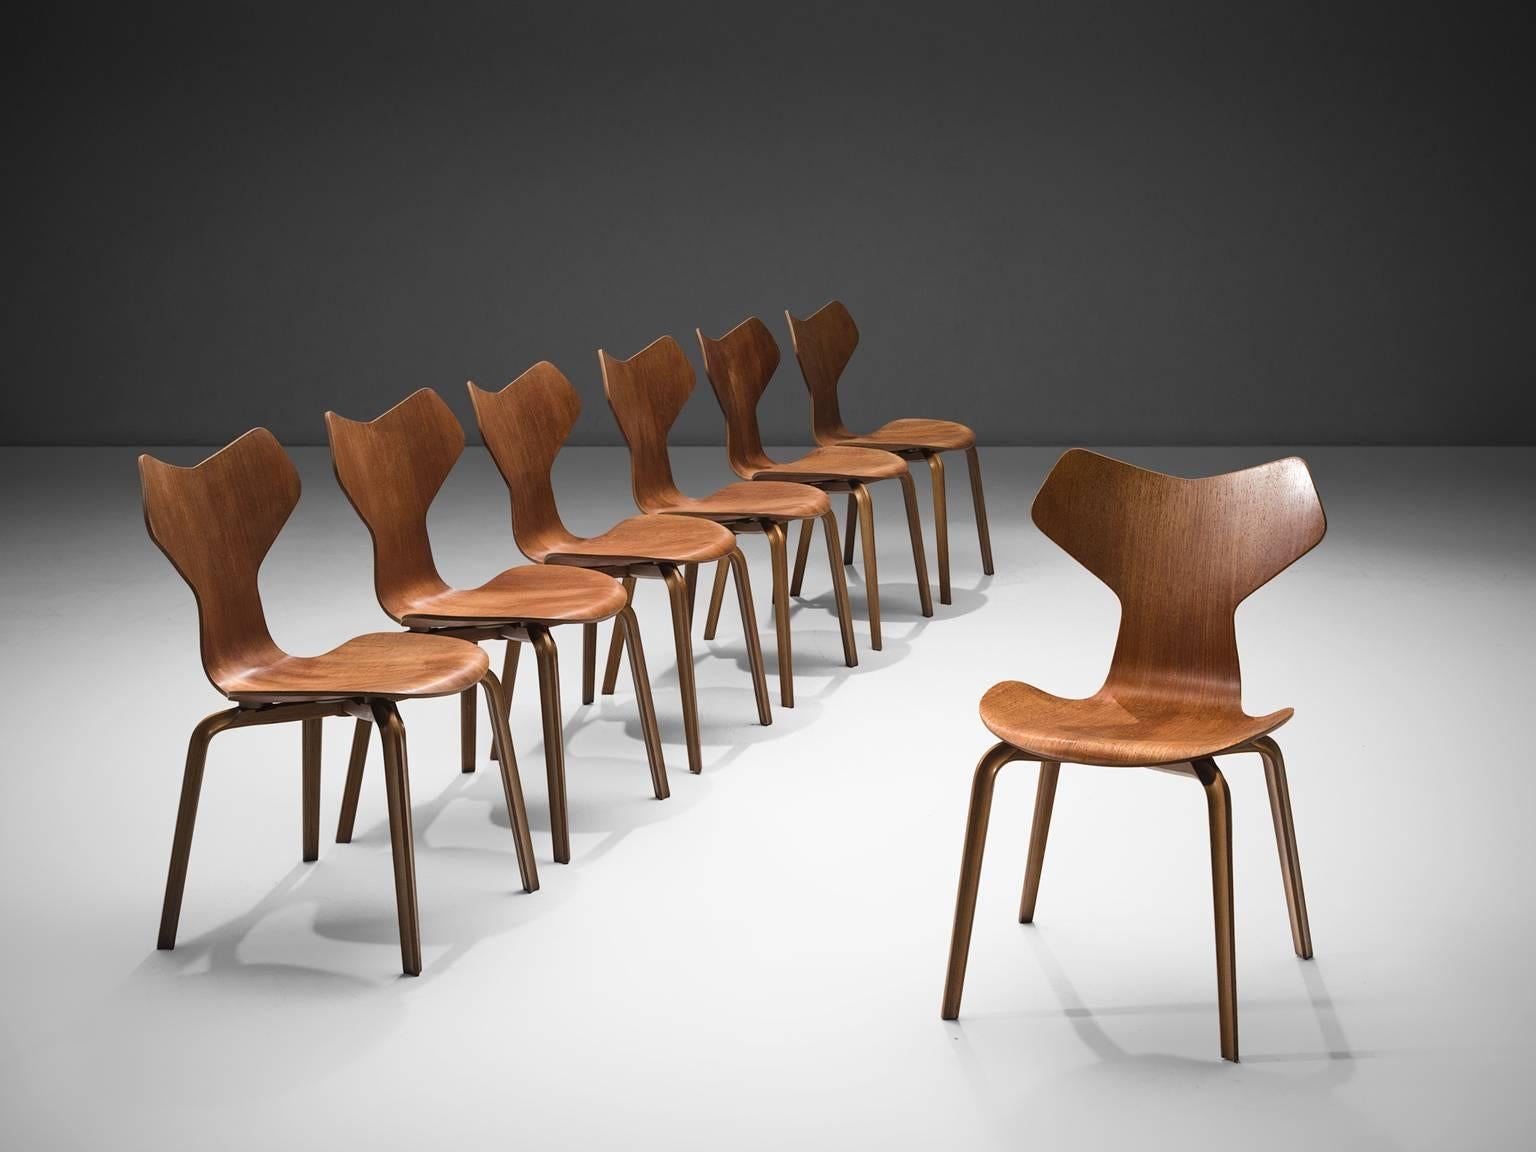 Arne Jacobsen for Fritz Hansen, set of seven 'Grand Prix' chairs model 3130, wood, Denmark, design 1957, production later.

The plywood chair model 3130 was first presented at the Spring Exhibition of the Danish Museum of Decorative Art in 1957.